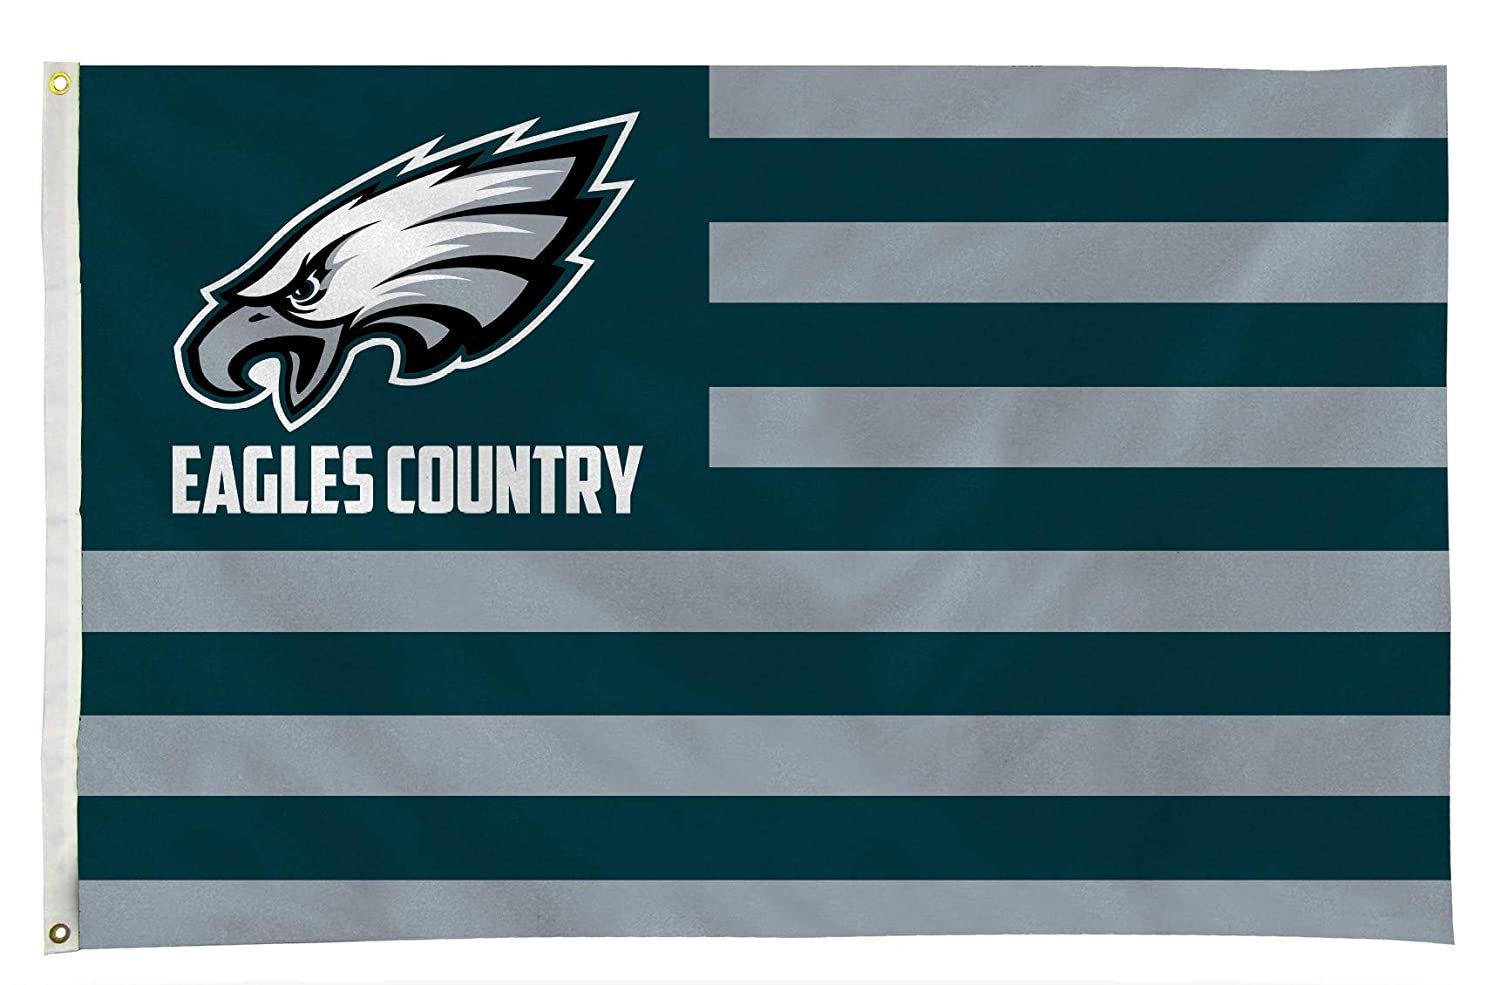 Philadelphia Eagles Flag Banner 3x5 Country Design Premium with Metal Grommets Outdoor House Football